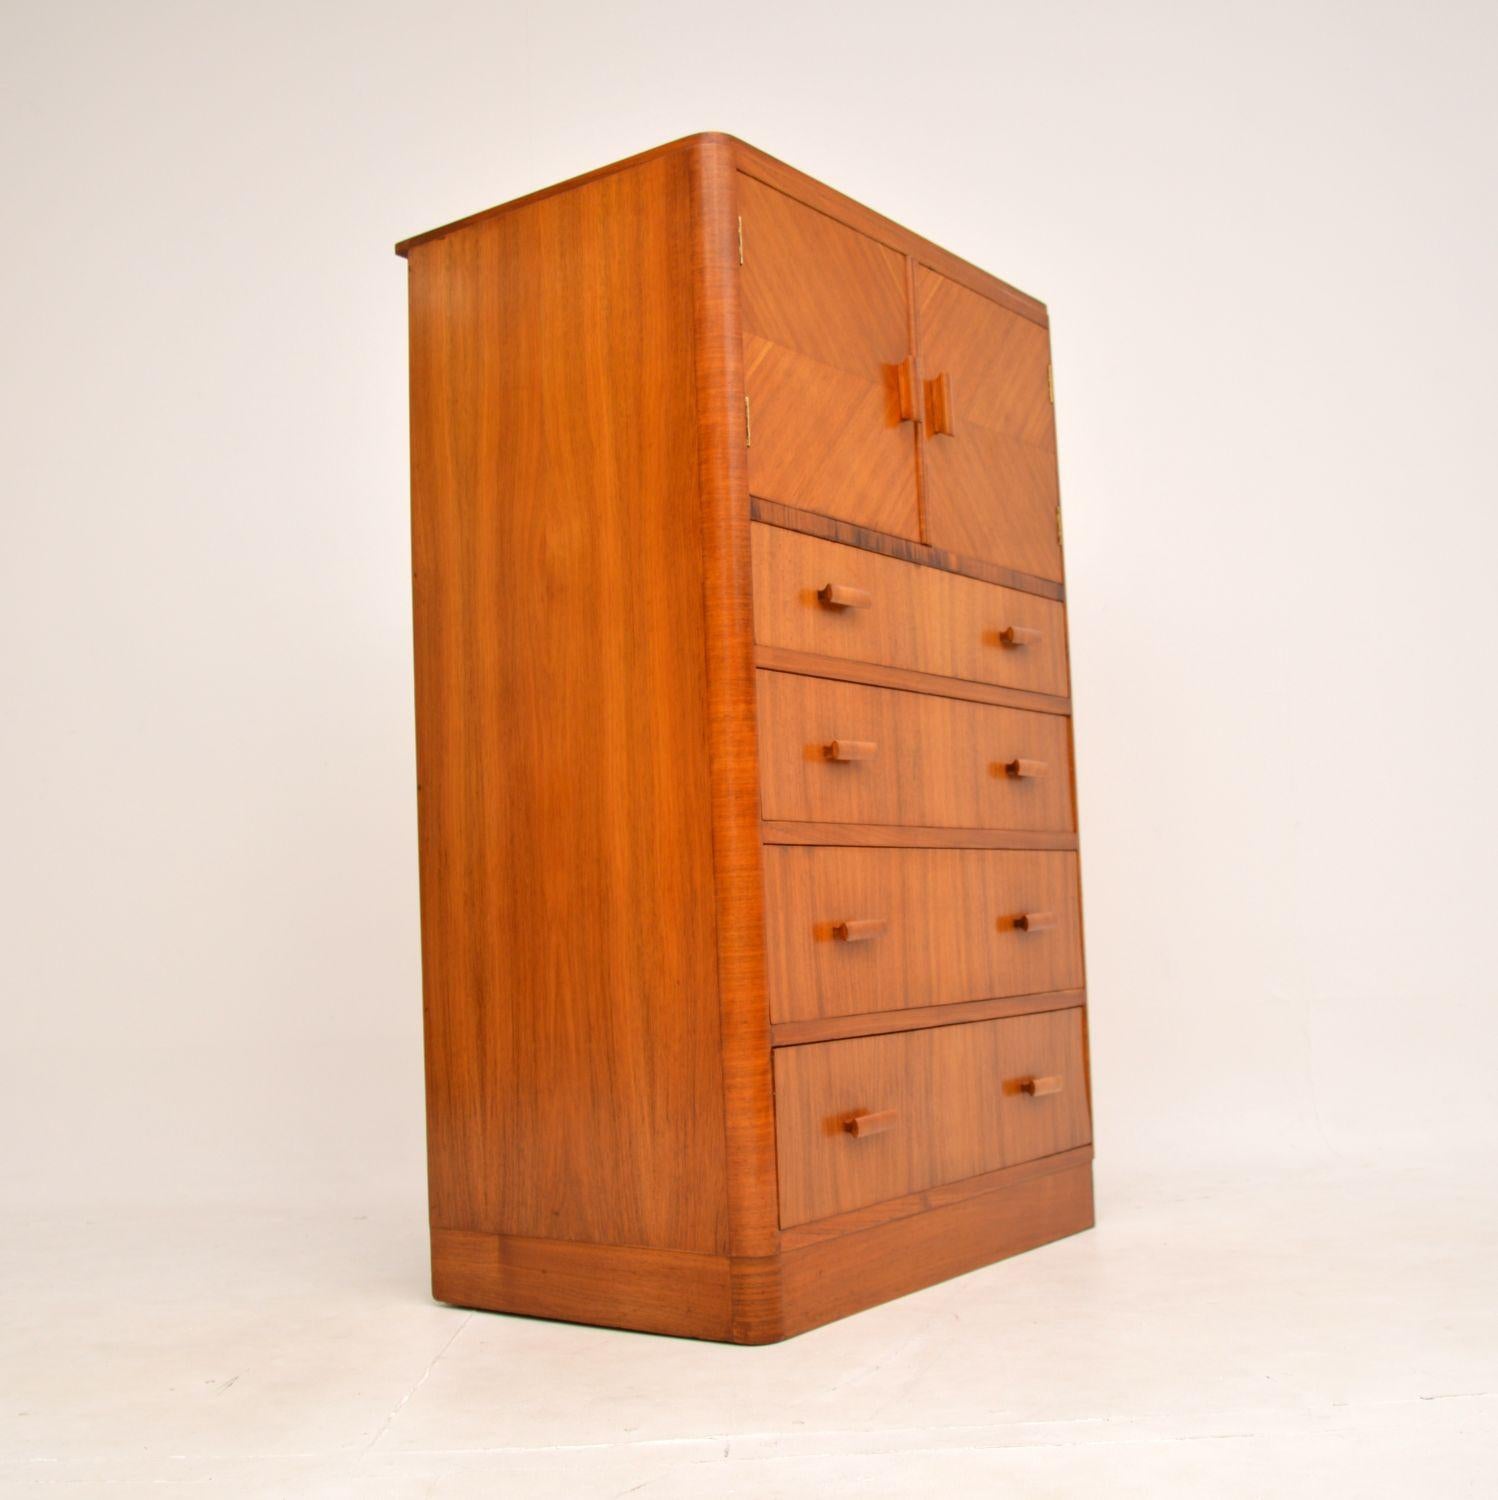 A stylish and very well made Art Deco walnut tallboy chest / cabinet. This was made in England, it dates from the 1920-30’s.

The quality is fantastic, this a great size and has a very useful design. There is lots of storage space, this is generous